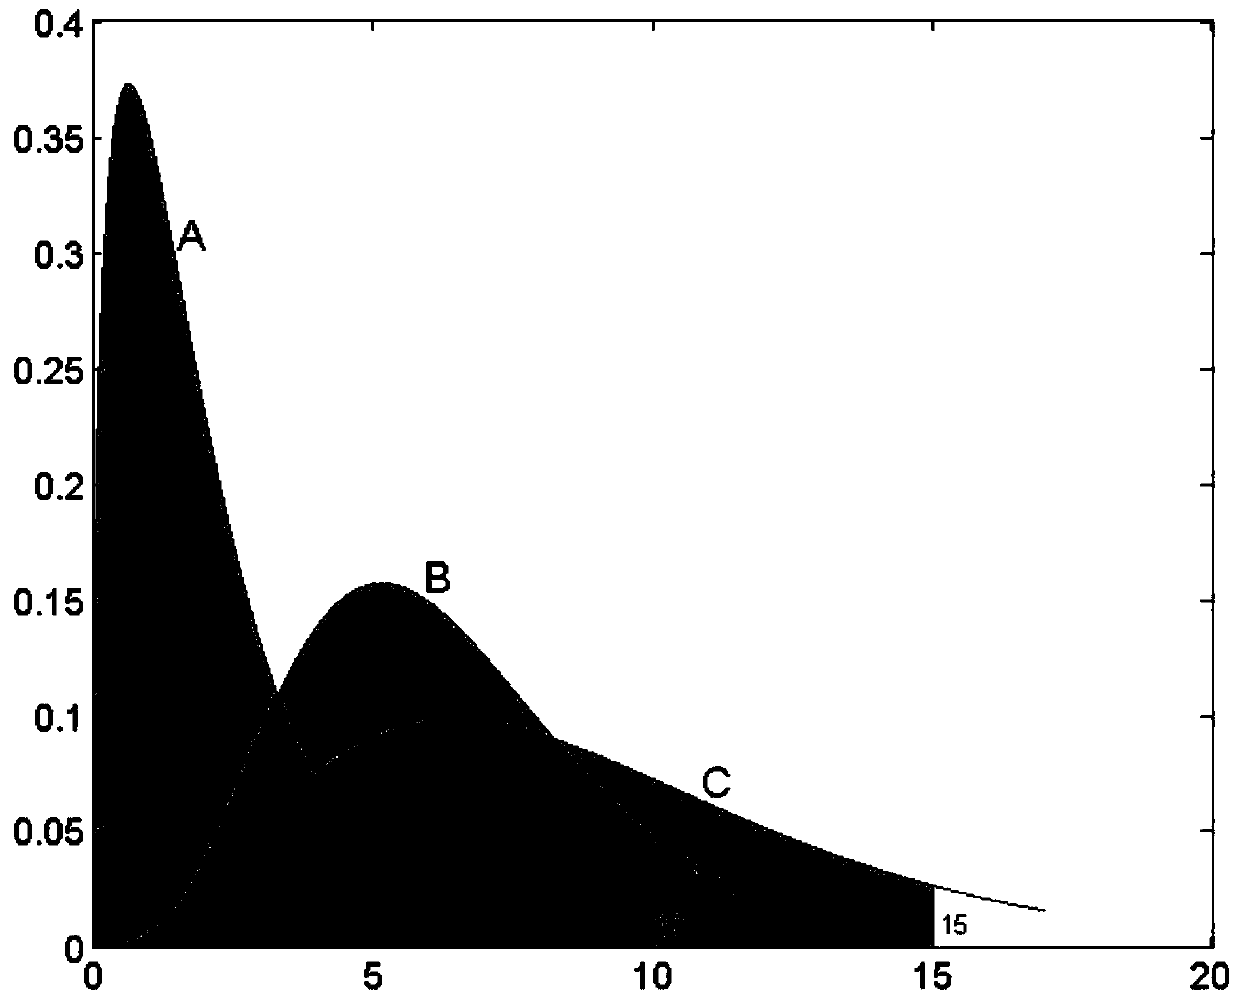 A Numerical Model Construction Method for Cave Karst Rock Mass